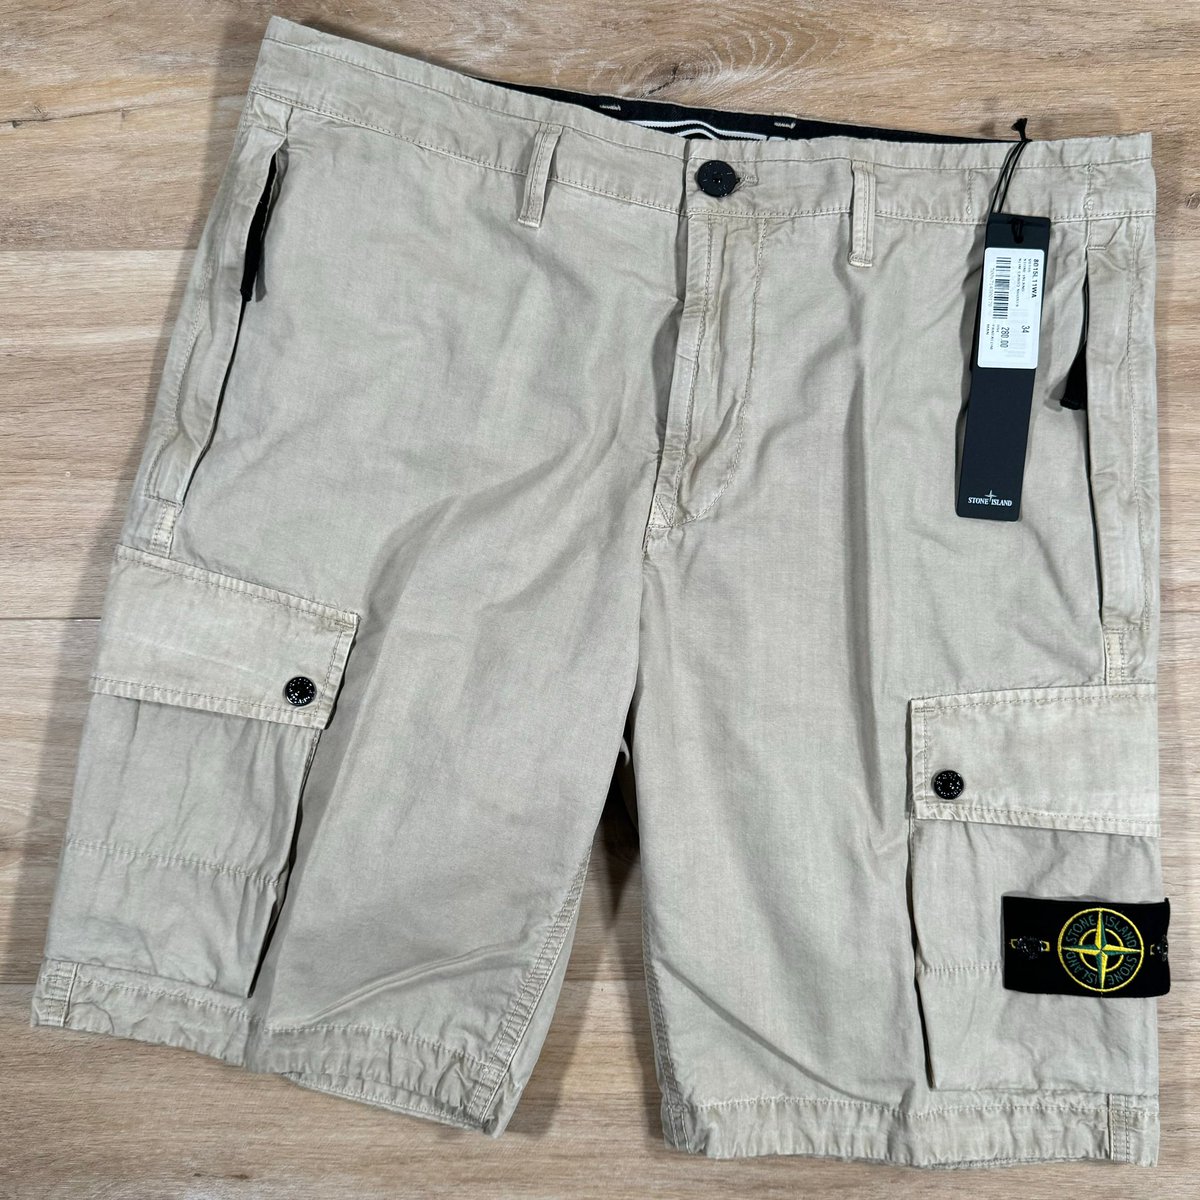 Stone Island cargo shorts in Sand! BUY 👉🏼 label-menswear.com/products/stone…